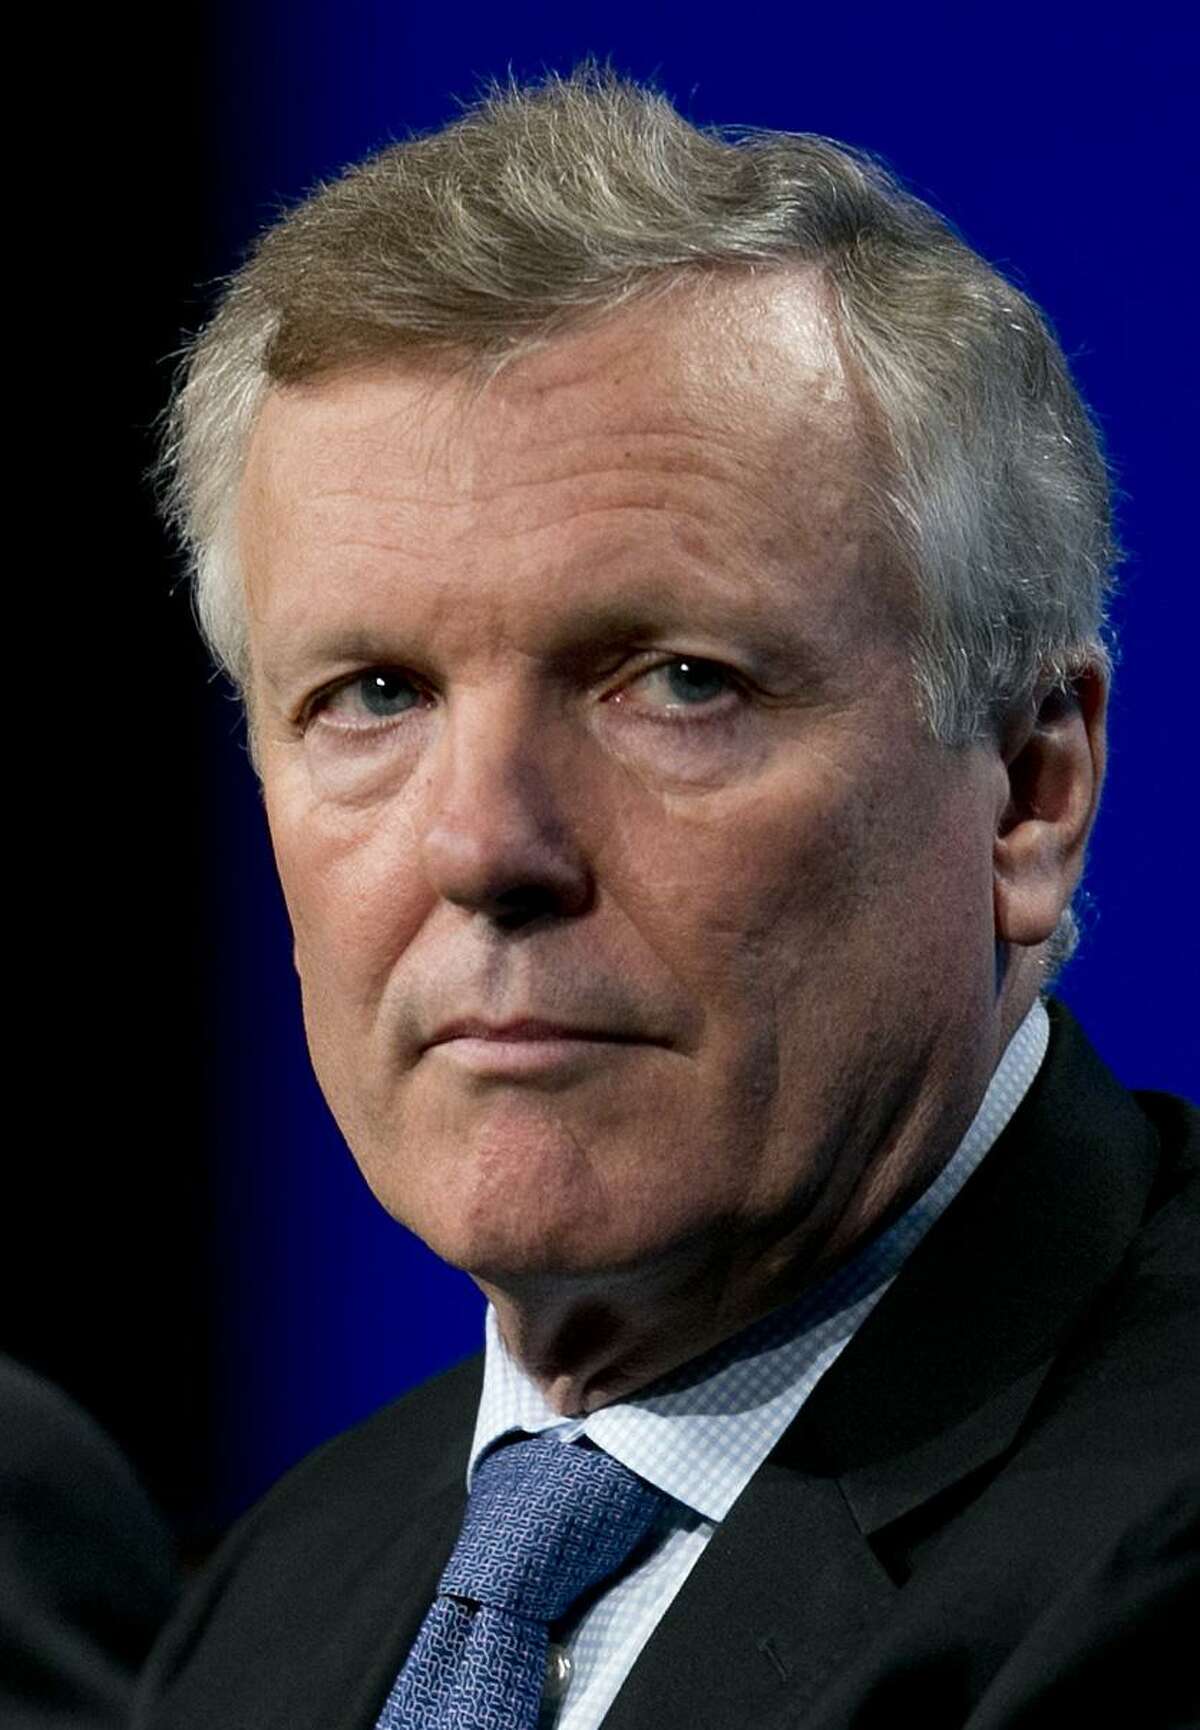 Tom Rutledge is CEO and chairman of Charter Communications.